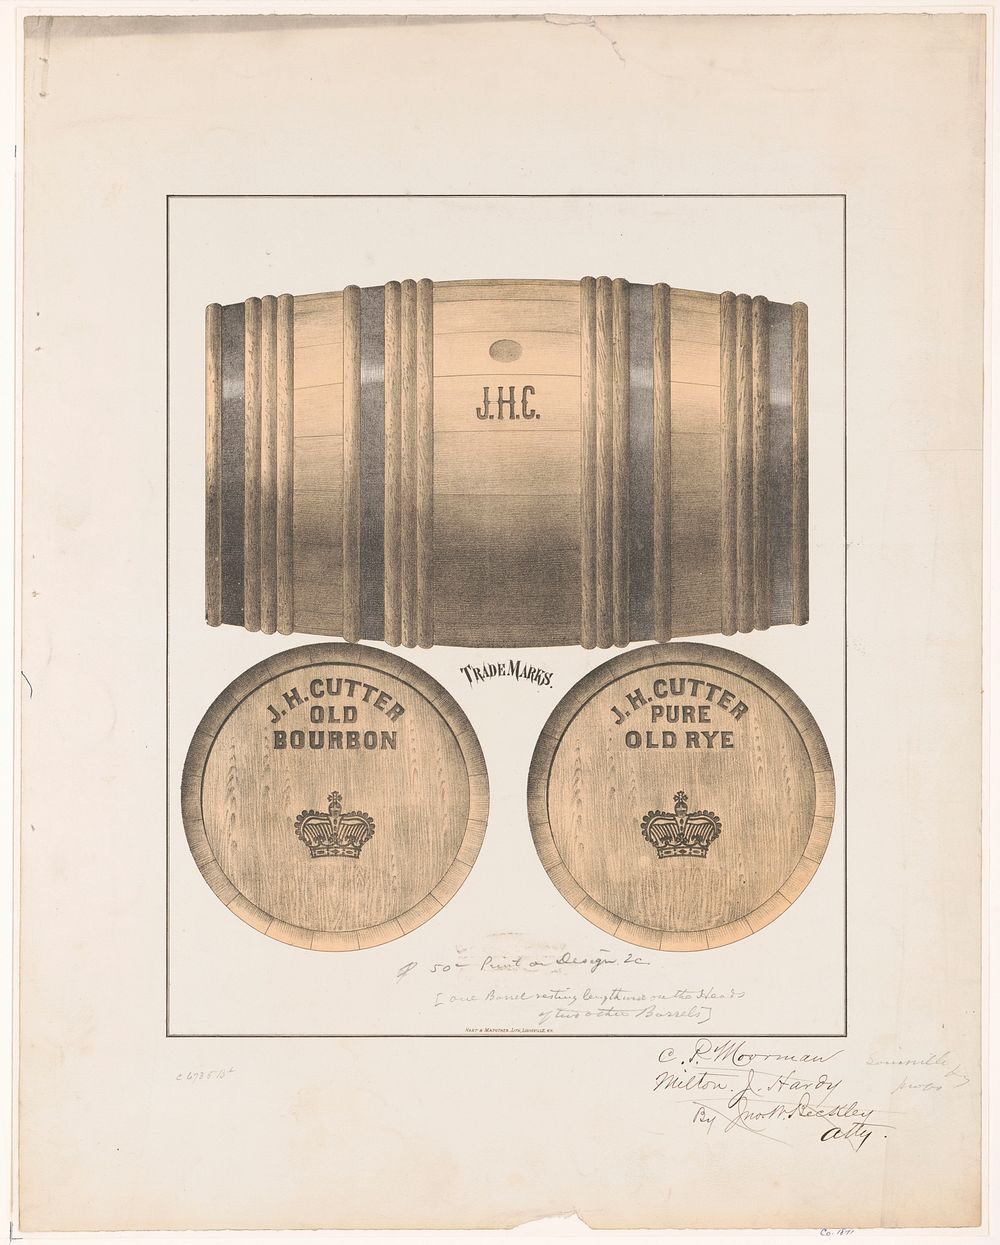 J.H. Cutter old bourbon. J.H. Cutter pure old rye. Original from the Library of Congress.